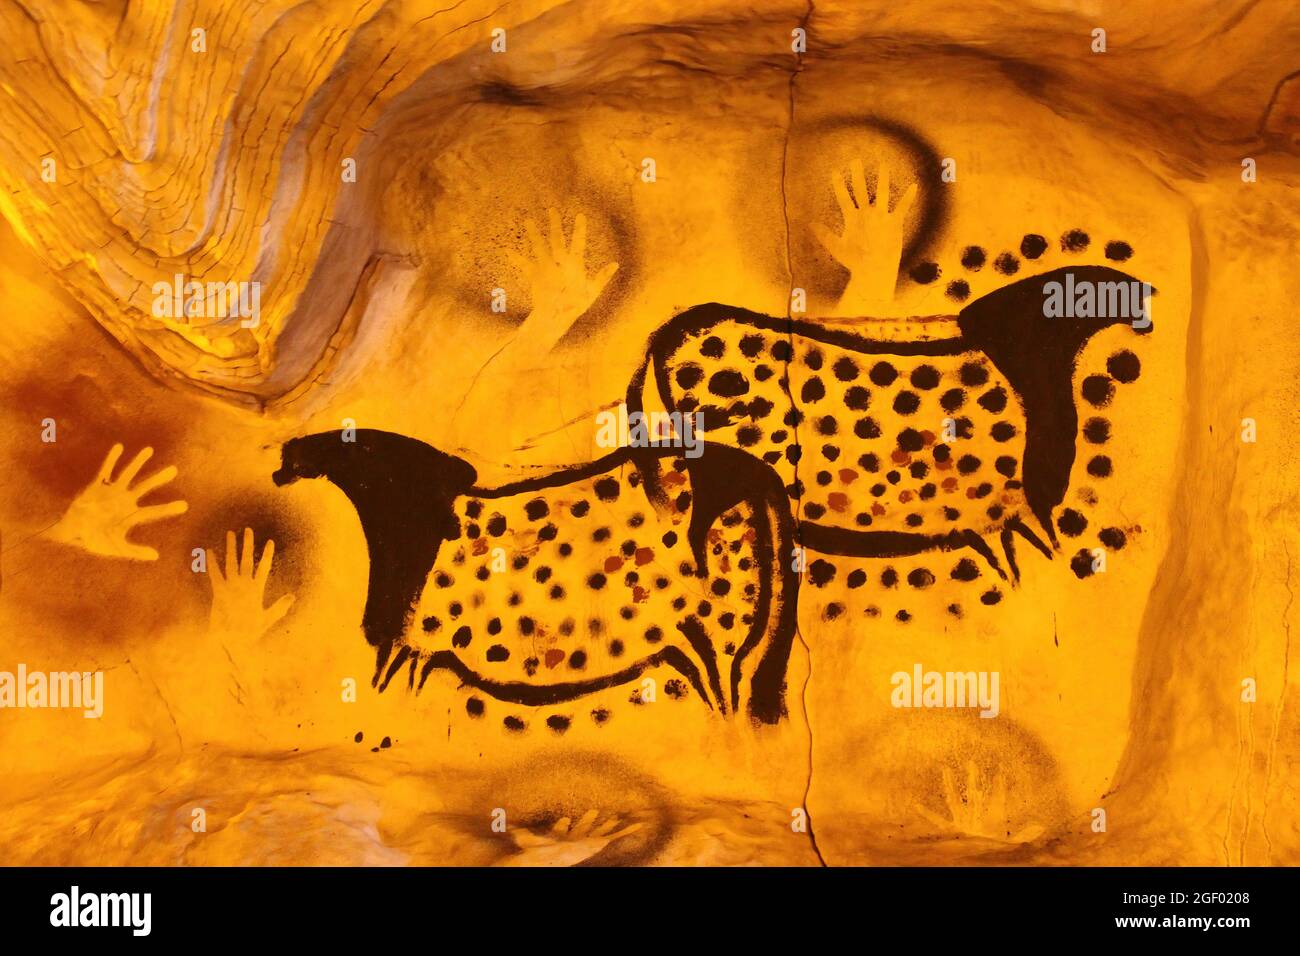 Modern Reconstruction of Prehistoric Cave With Art Depicting Spotted / Dappled Horses of Peche Merle and Hand Prints Stock Photo